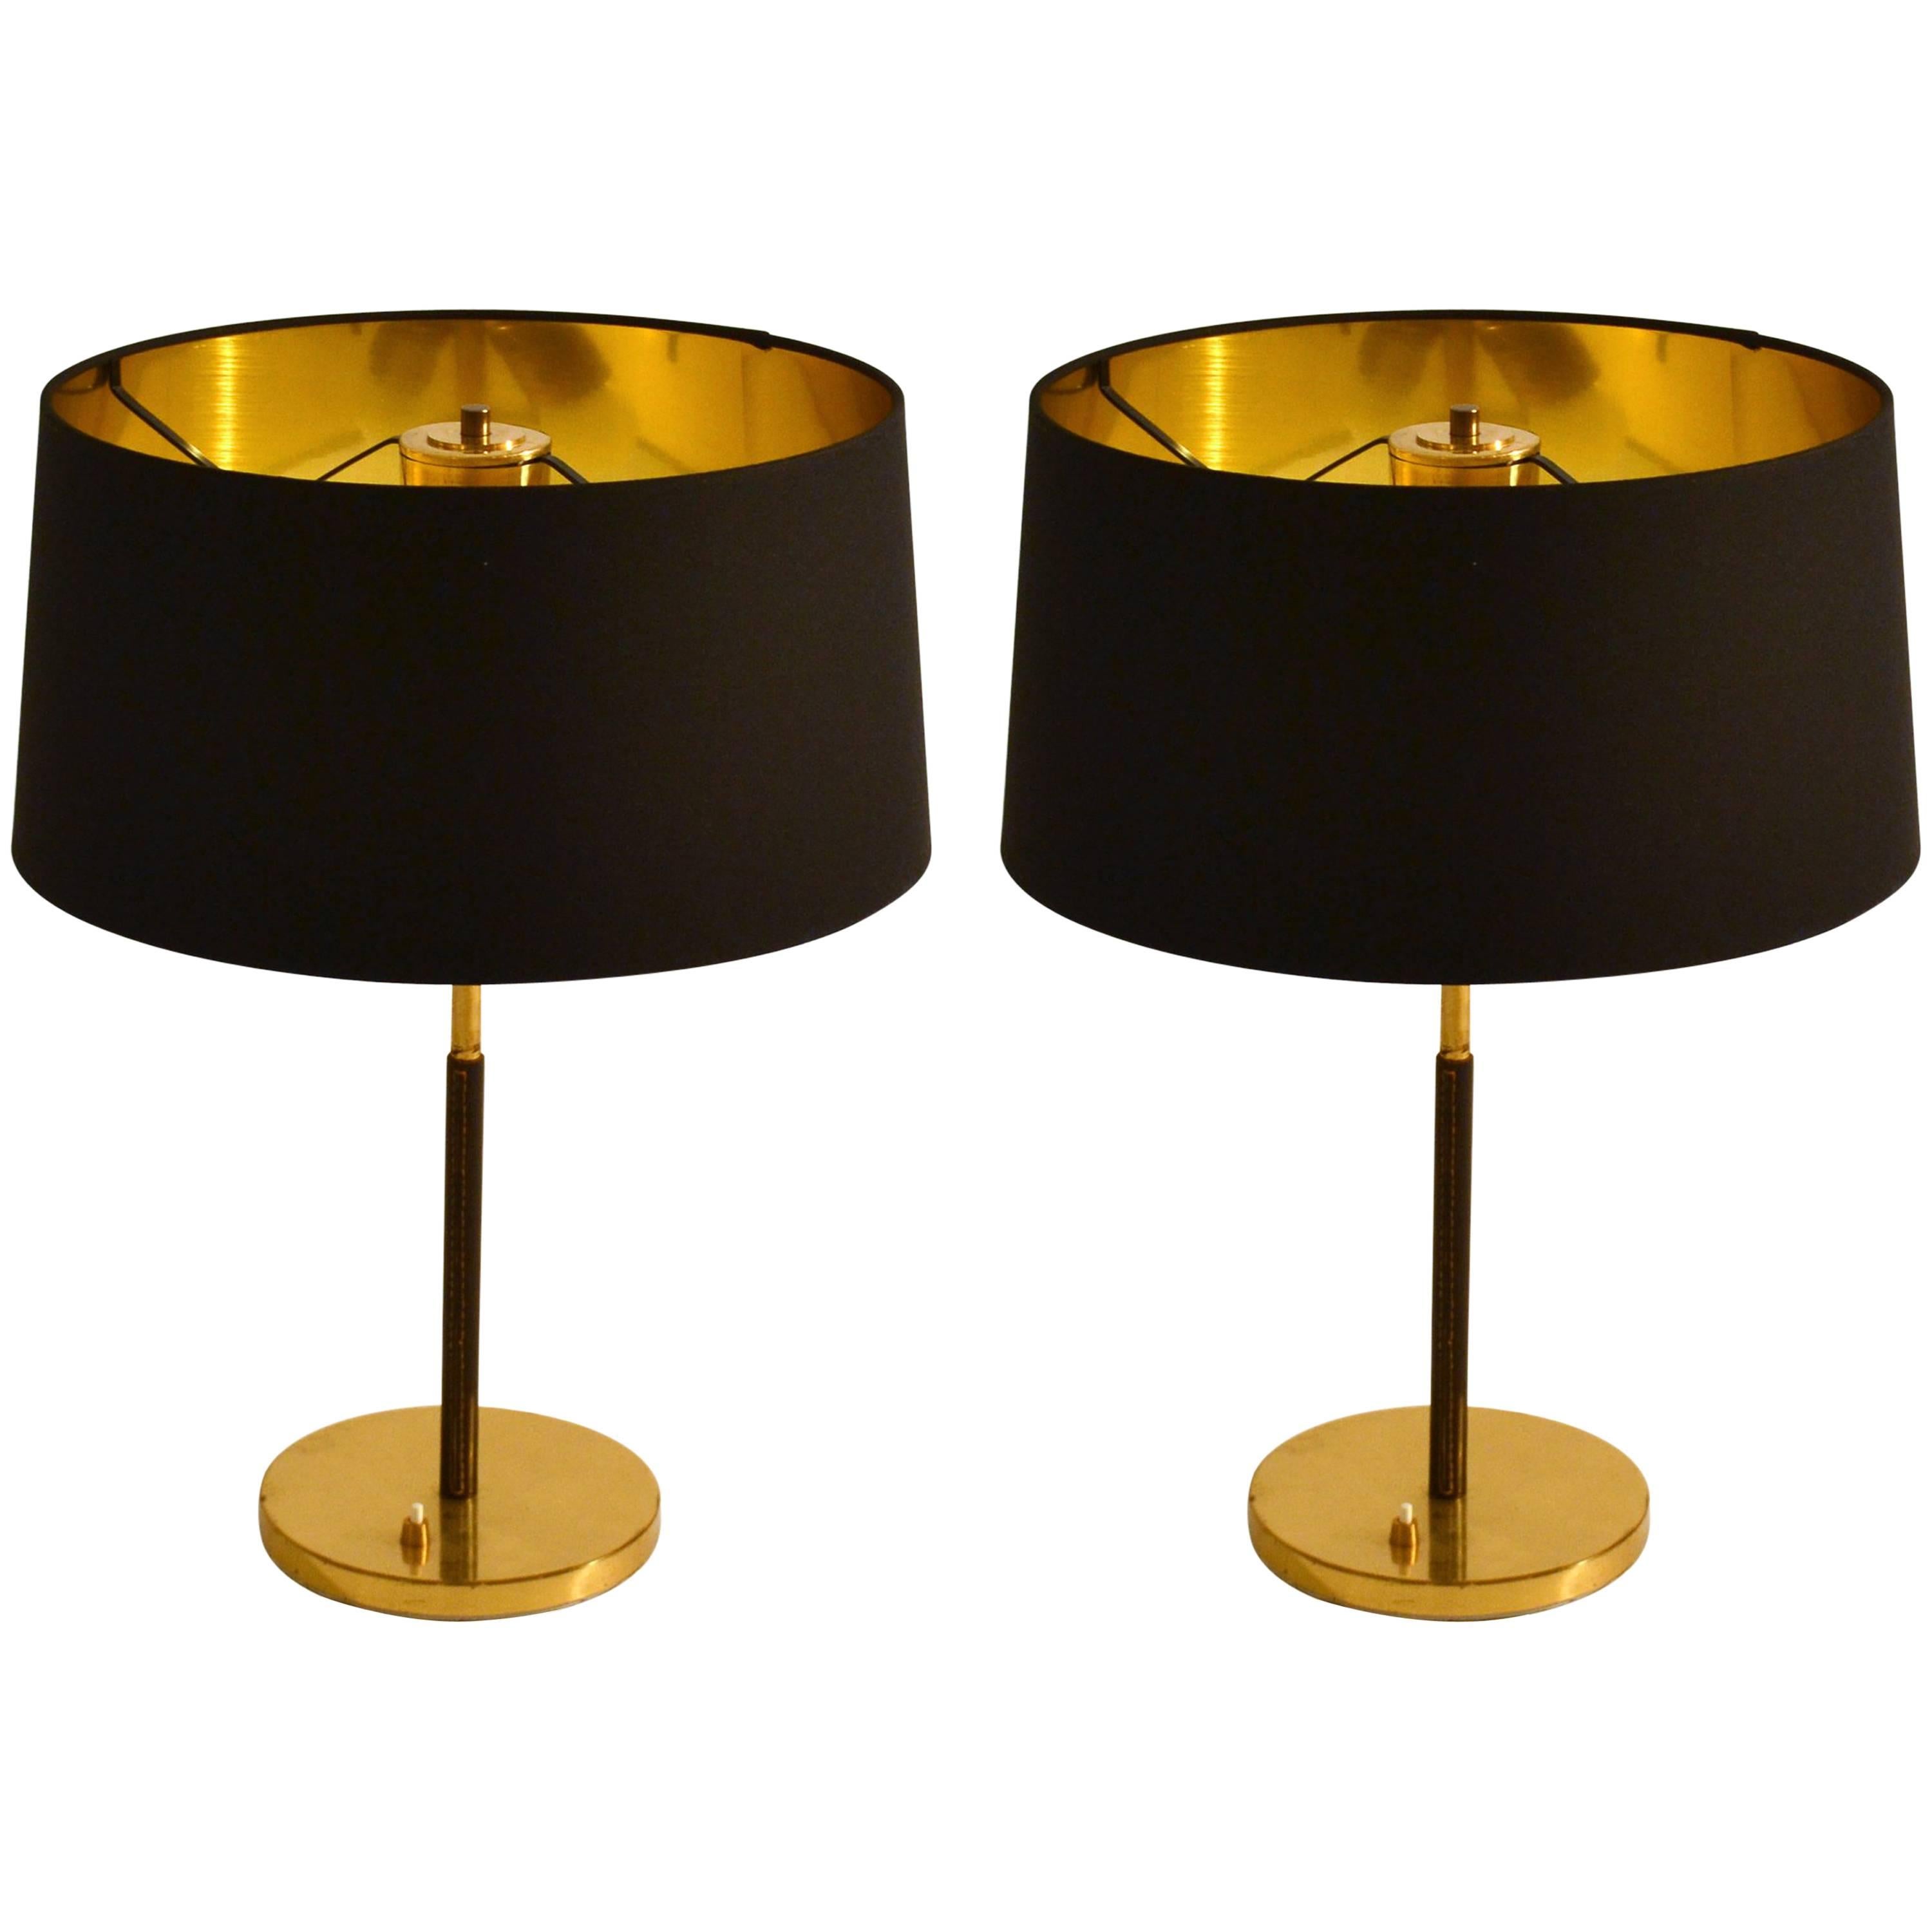 1950s Pair of Minimal Black and Gold Table Lamps by Kalmar